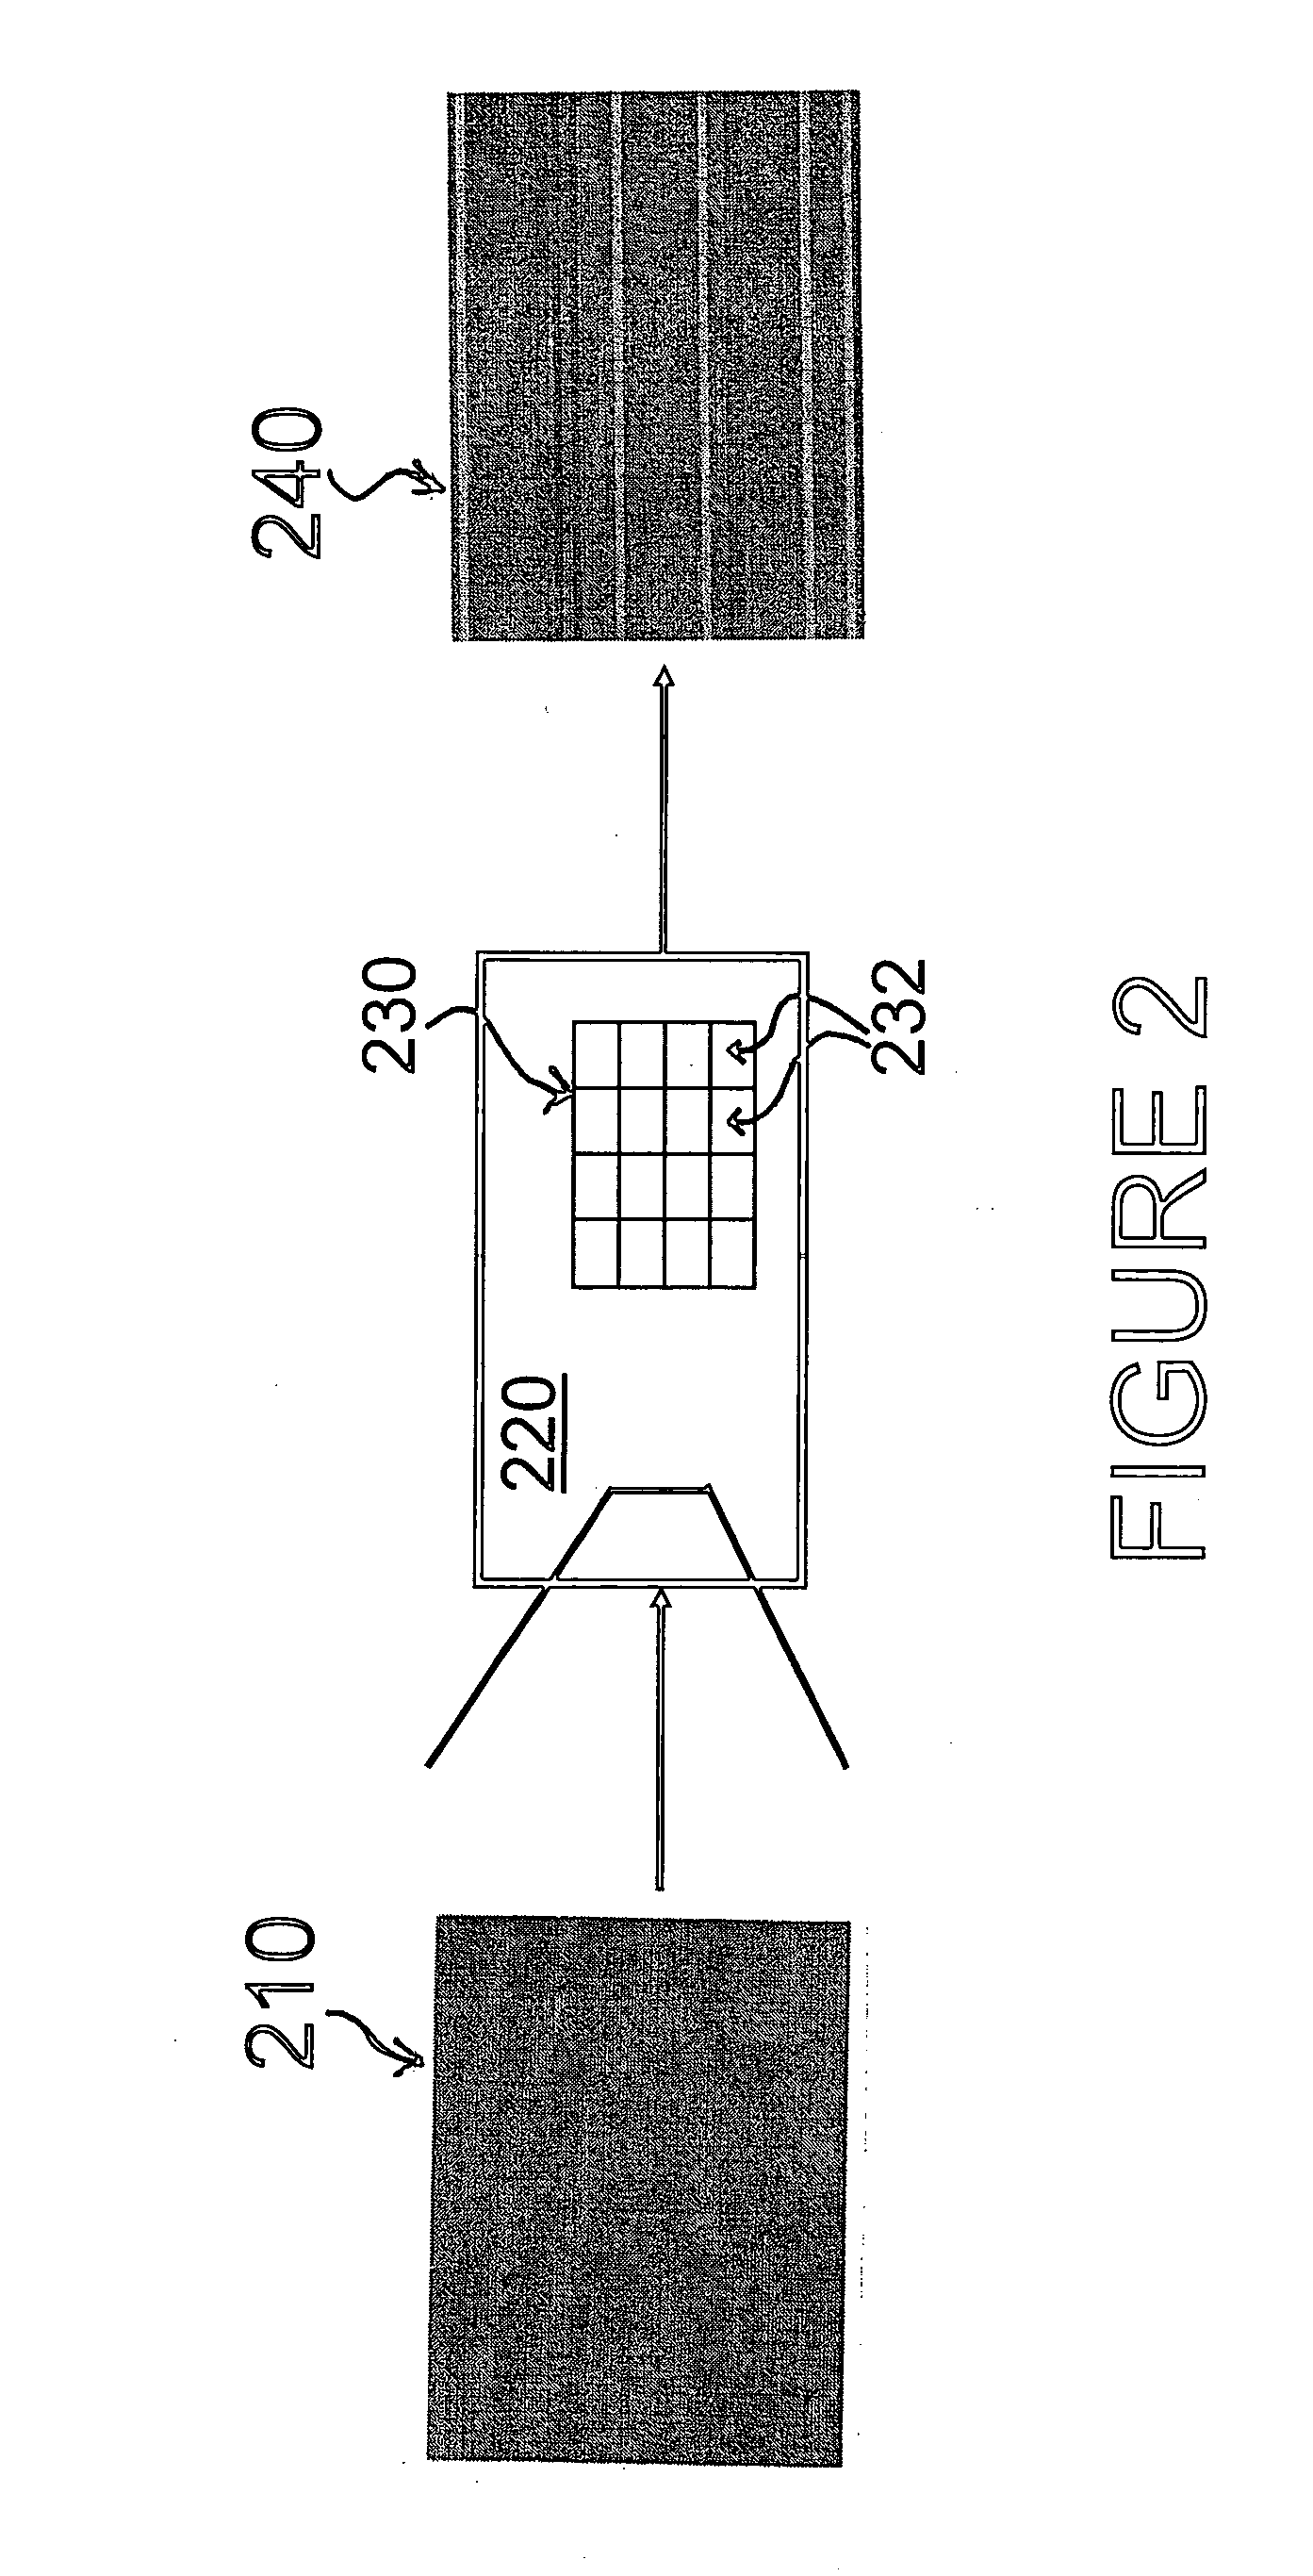 Method and apparatus providing imager noise reduction using parallel input arithmetic mean modules